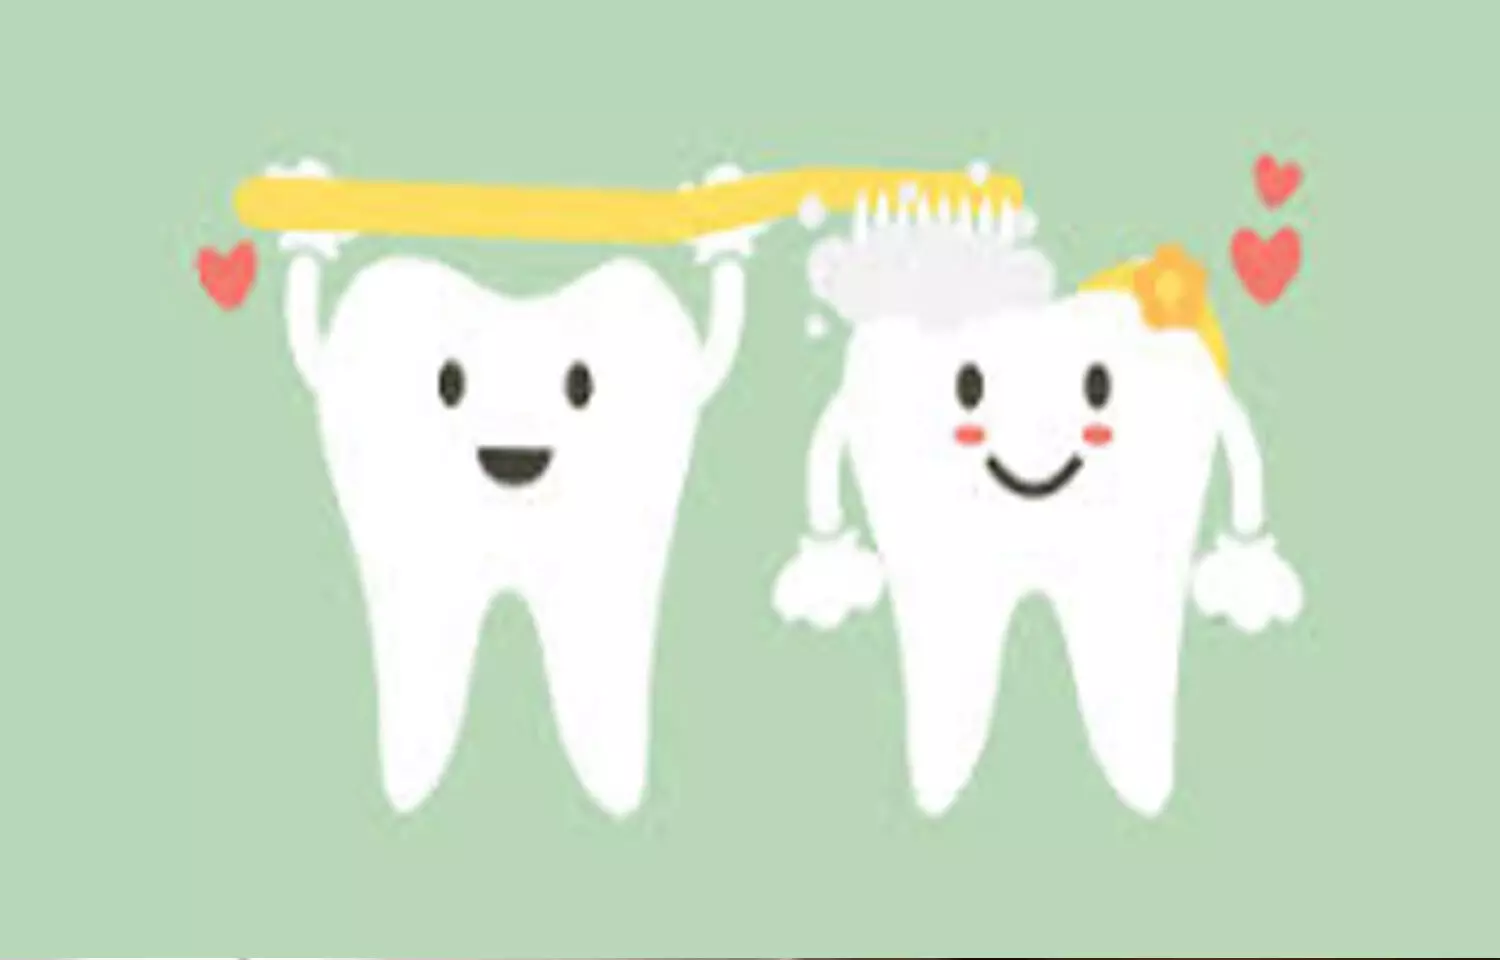 Bleaching toothpaste with high HP concentration improves tooth shade, Finds study